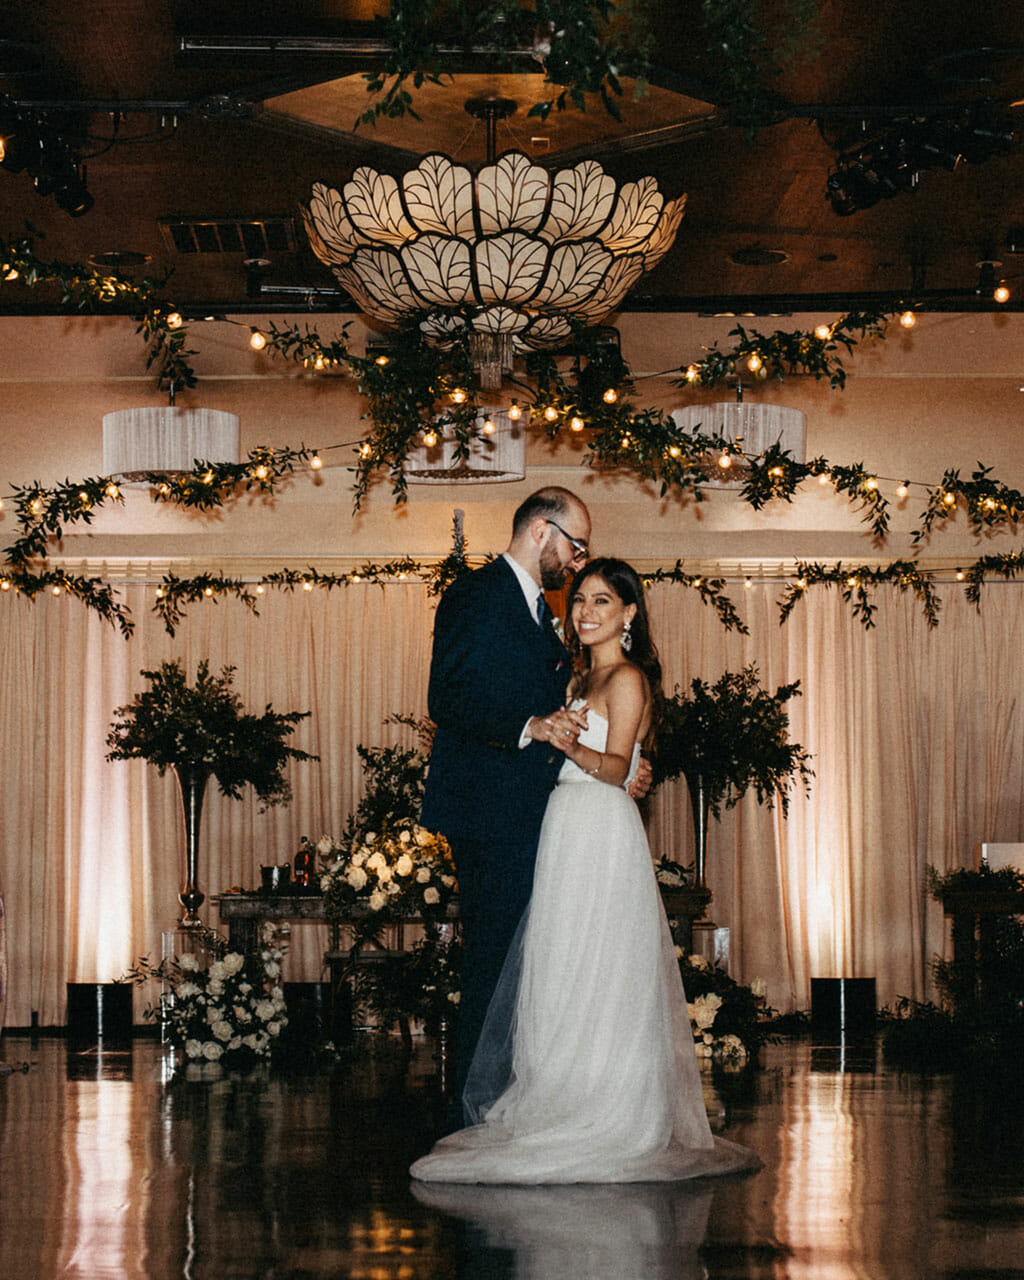 wedding couple standing under noor's sofia banquet hall chandelier with greenery wedding reception decor and string lights